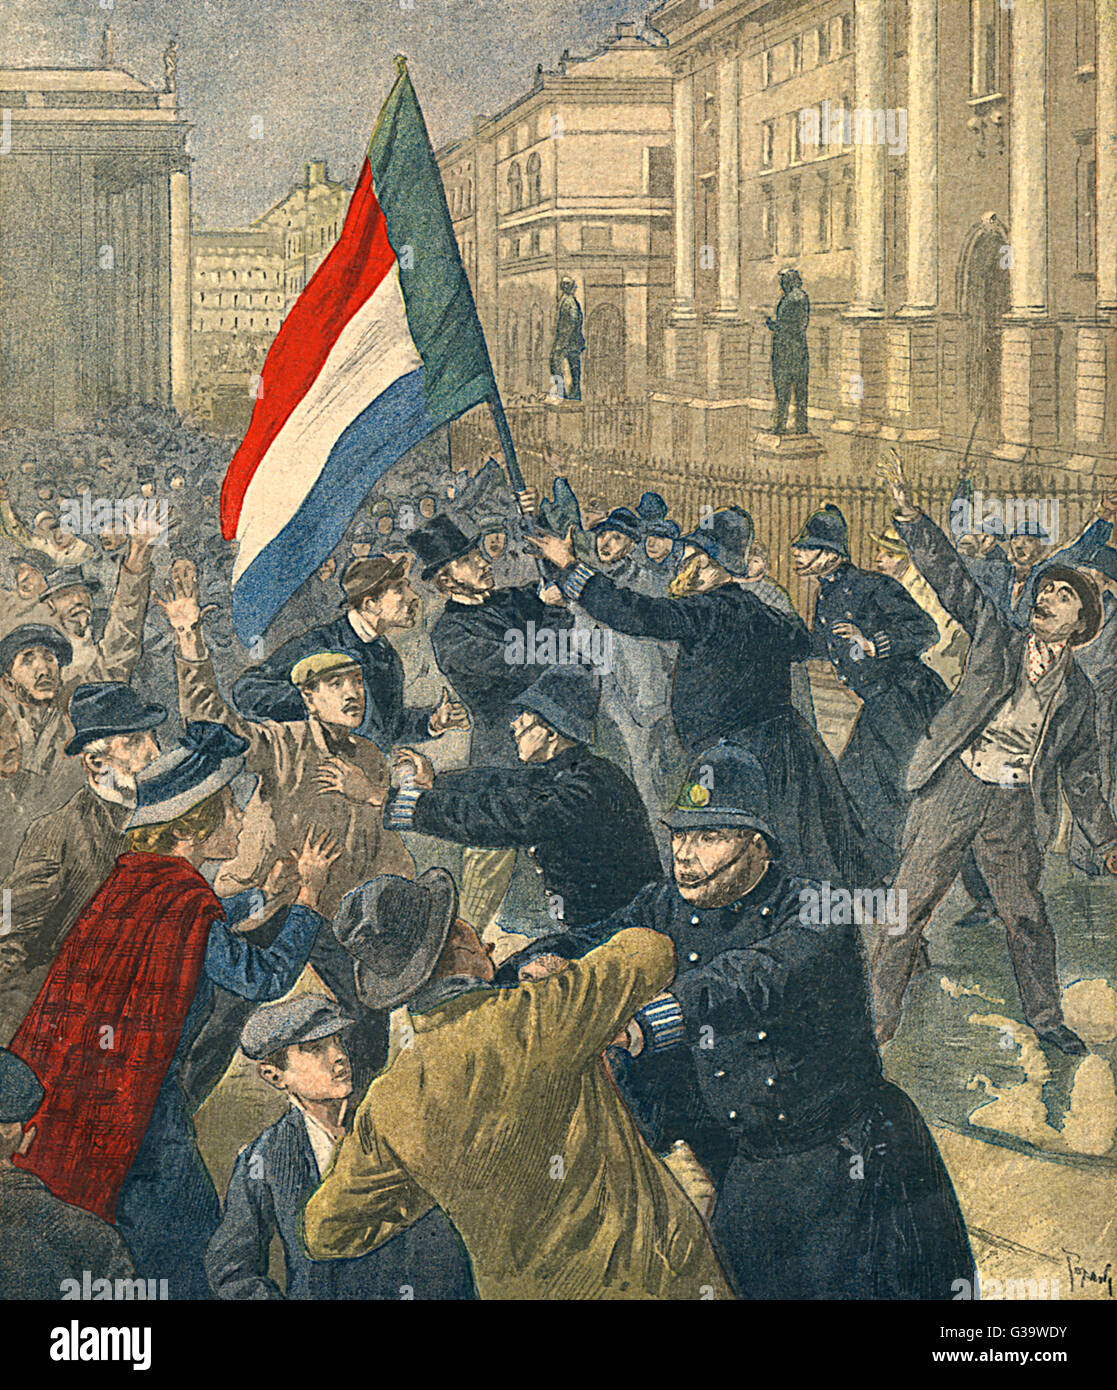 Demonstration against the  British politician Joseph  Chamberlain during his visit  to Dublin.       Date: 1899 Stock Photo